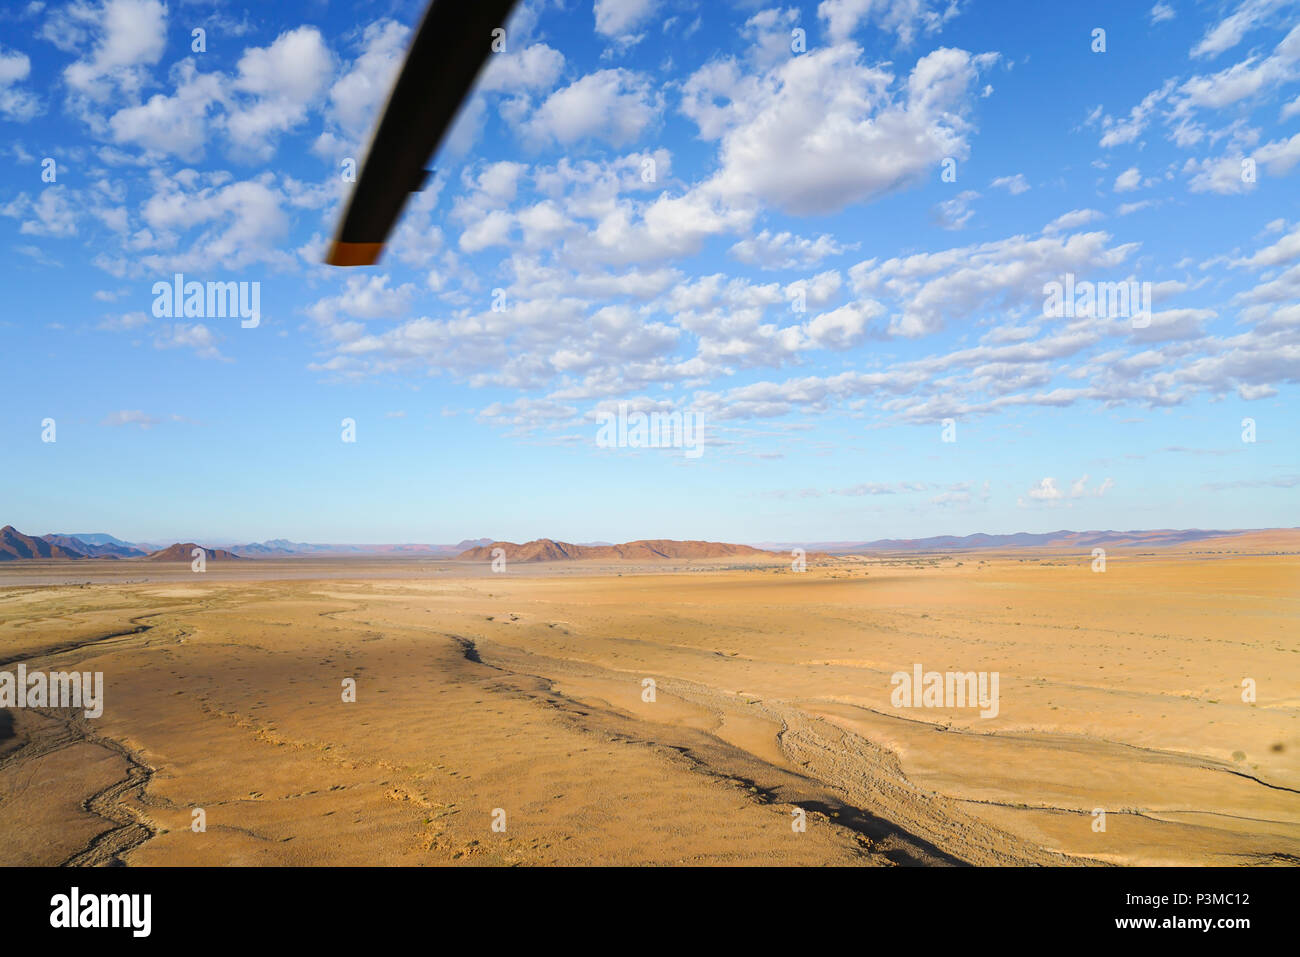 Aerial landscape, wide flat  area stretching to horizon with helicopter rotor blade  from tourist helicopter flight over Sossusvlei Namibia. Stock Photo